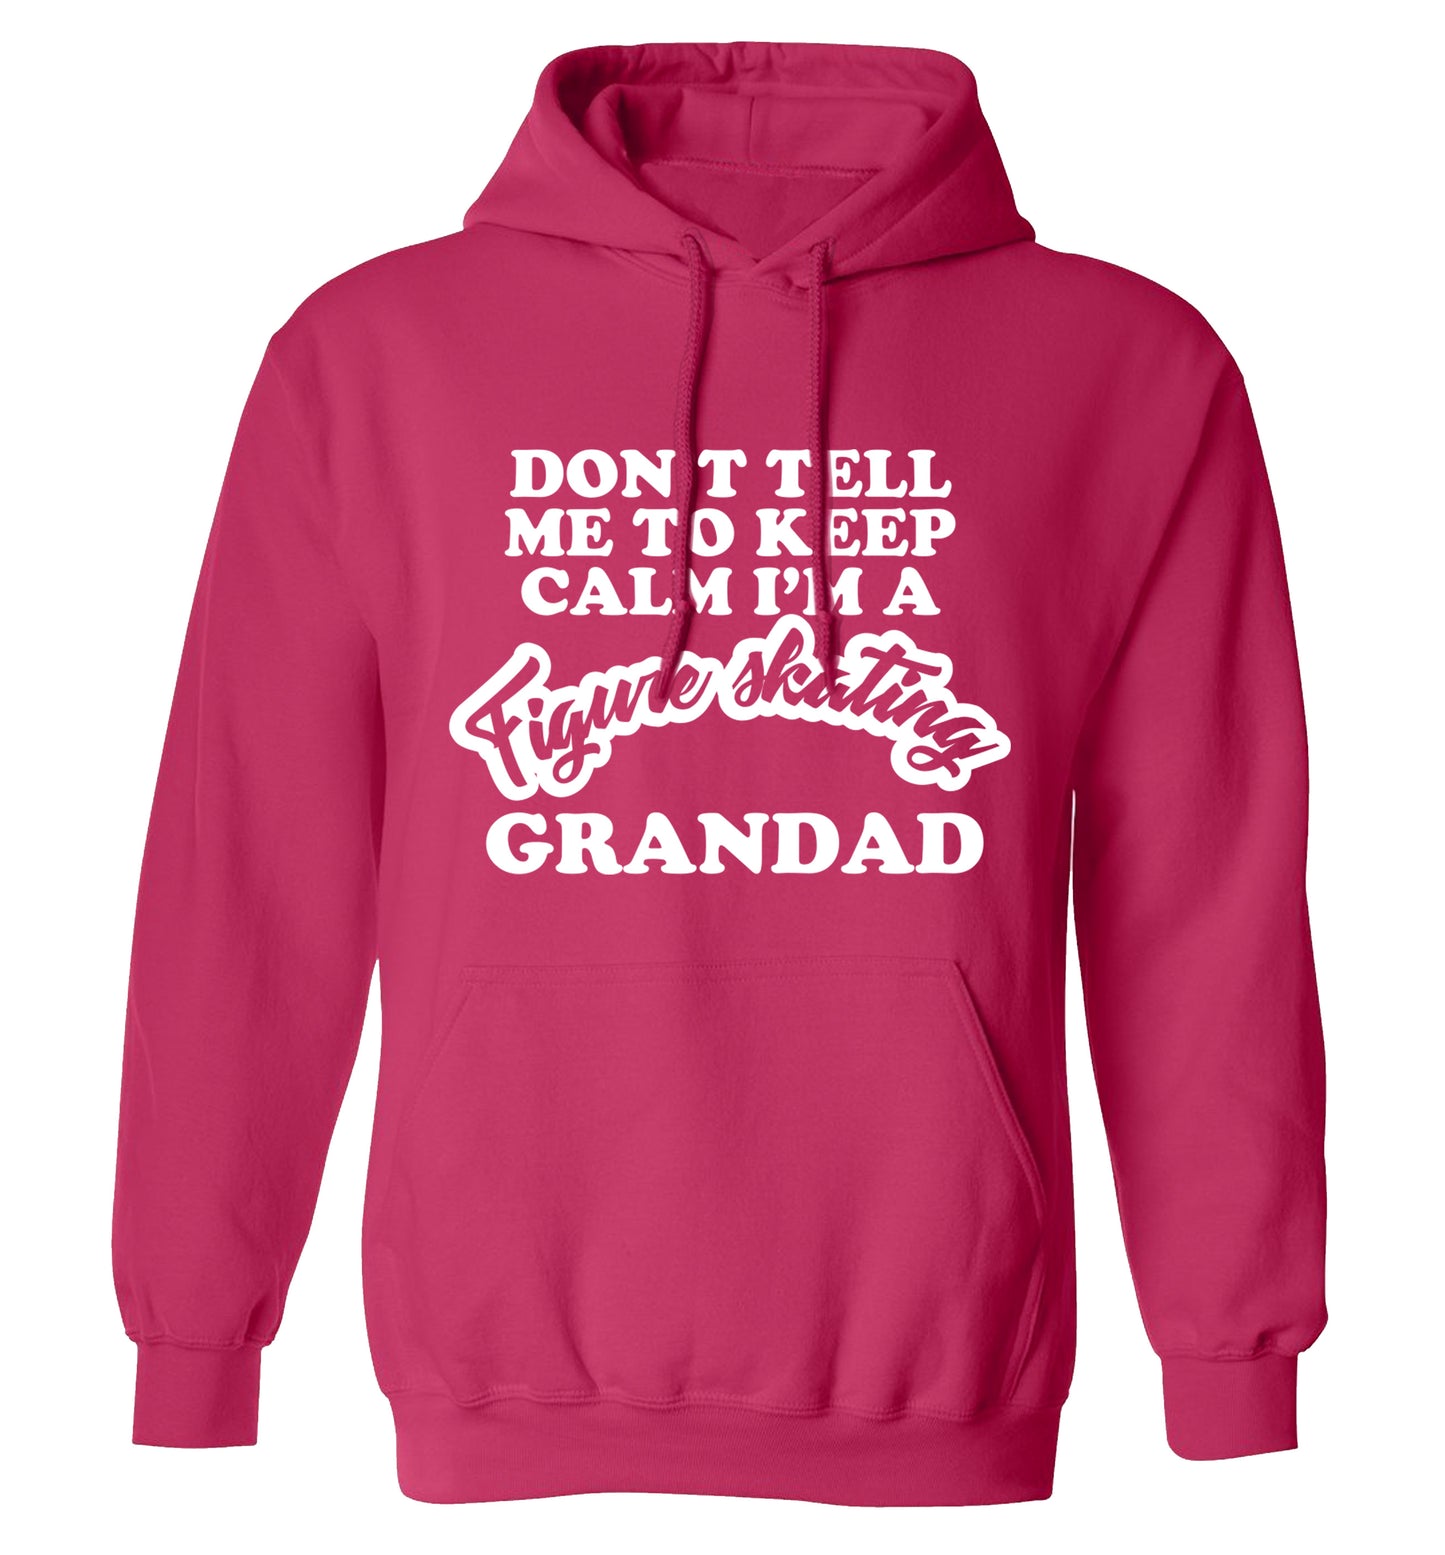 Don't tell me to keep calm I'm a figure skating grandad adults unisexpink hoodie 2XL